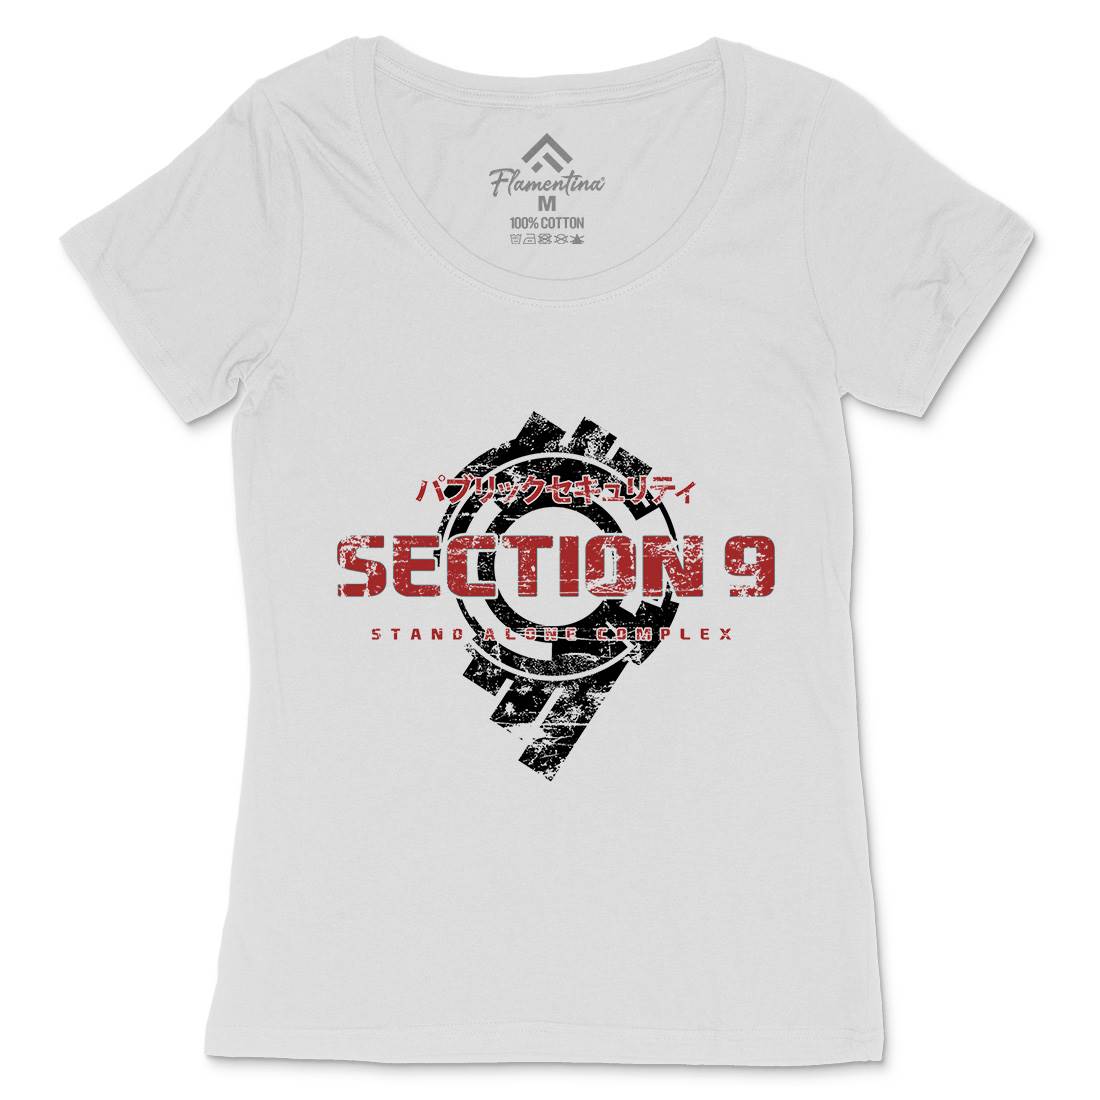 Section 9 Womens Scoop Neck T-Shirt Space D193